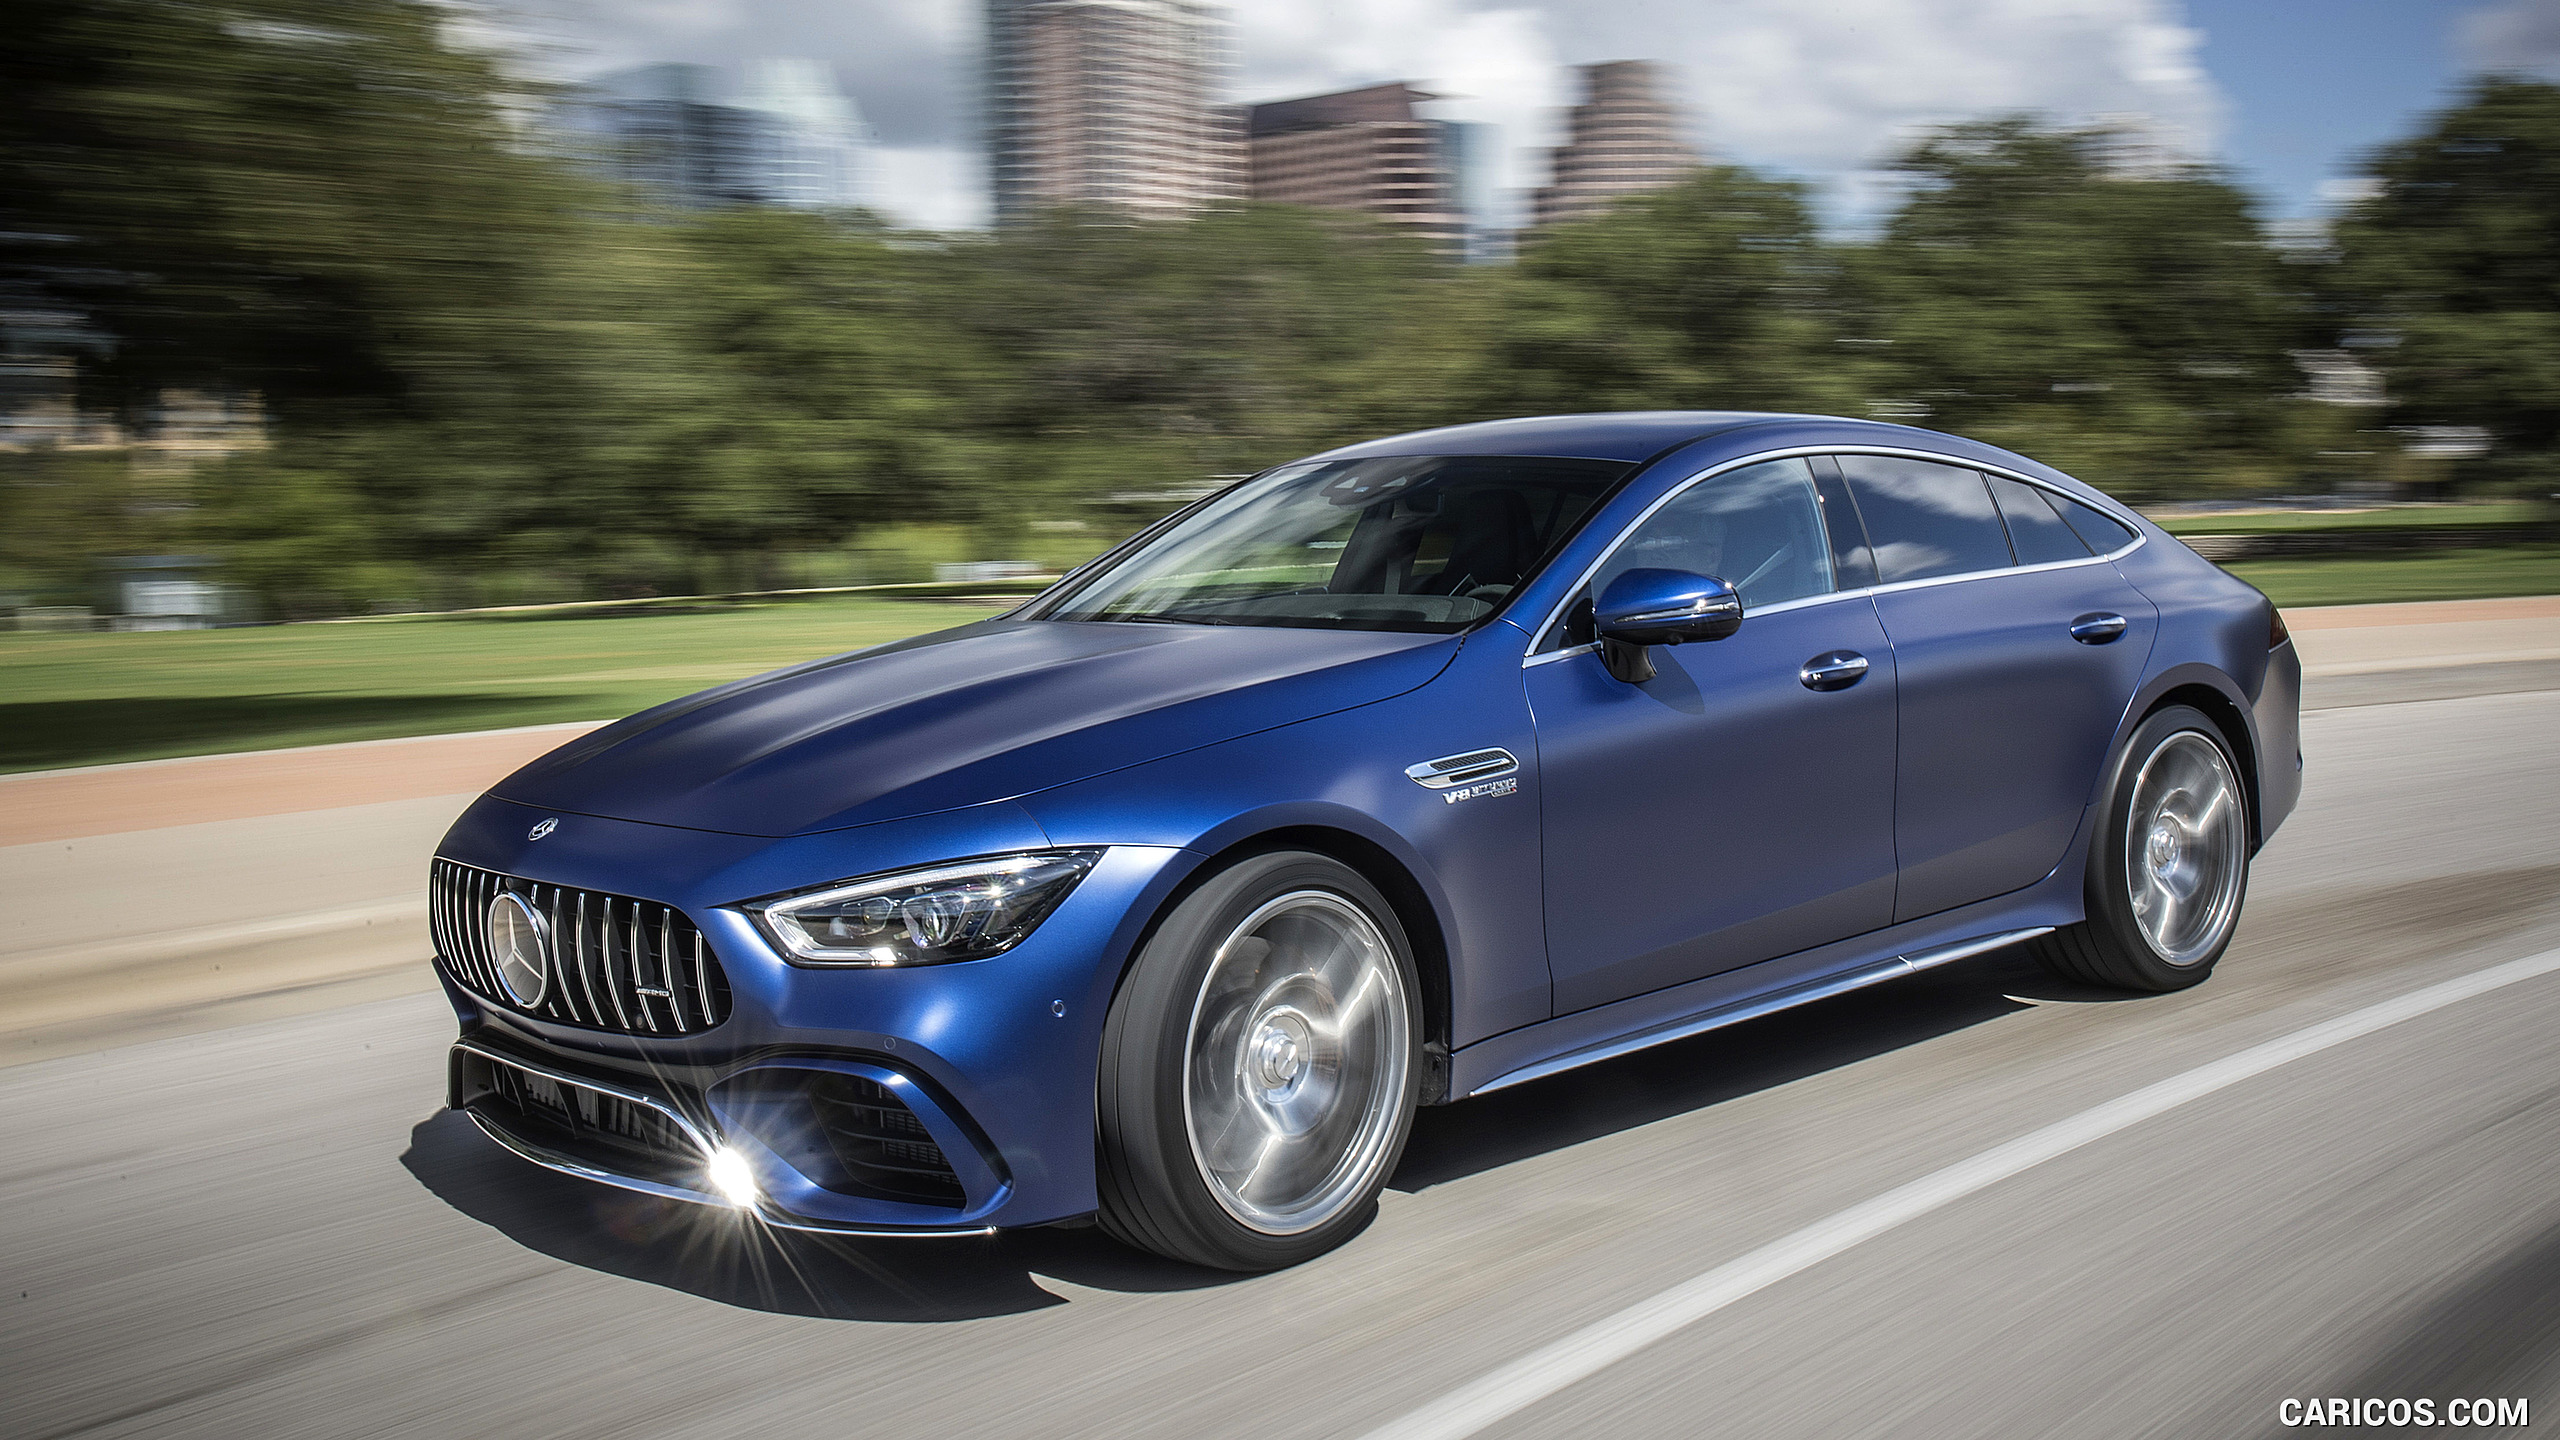 2019 Mercedes-AMG GT 63 S 4MATIC+ 4-Door Coupe - Front Three-Quarter, #113 of 427